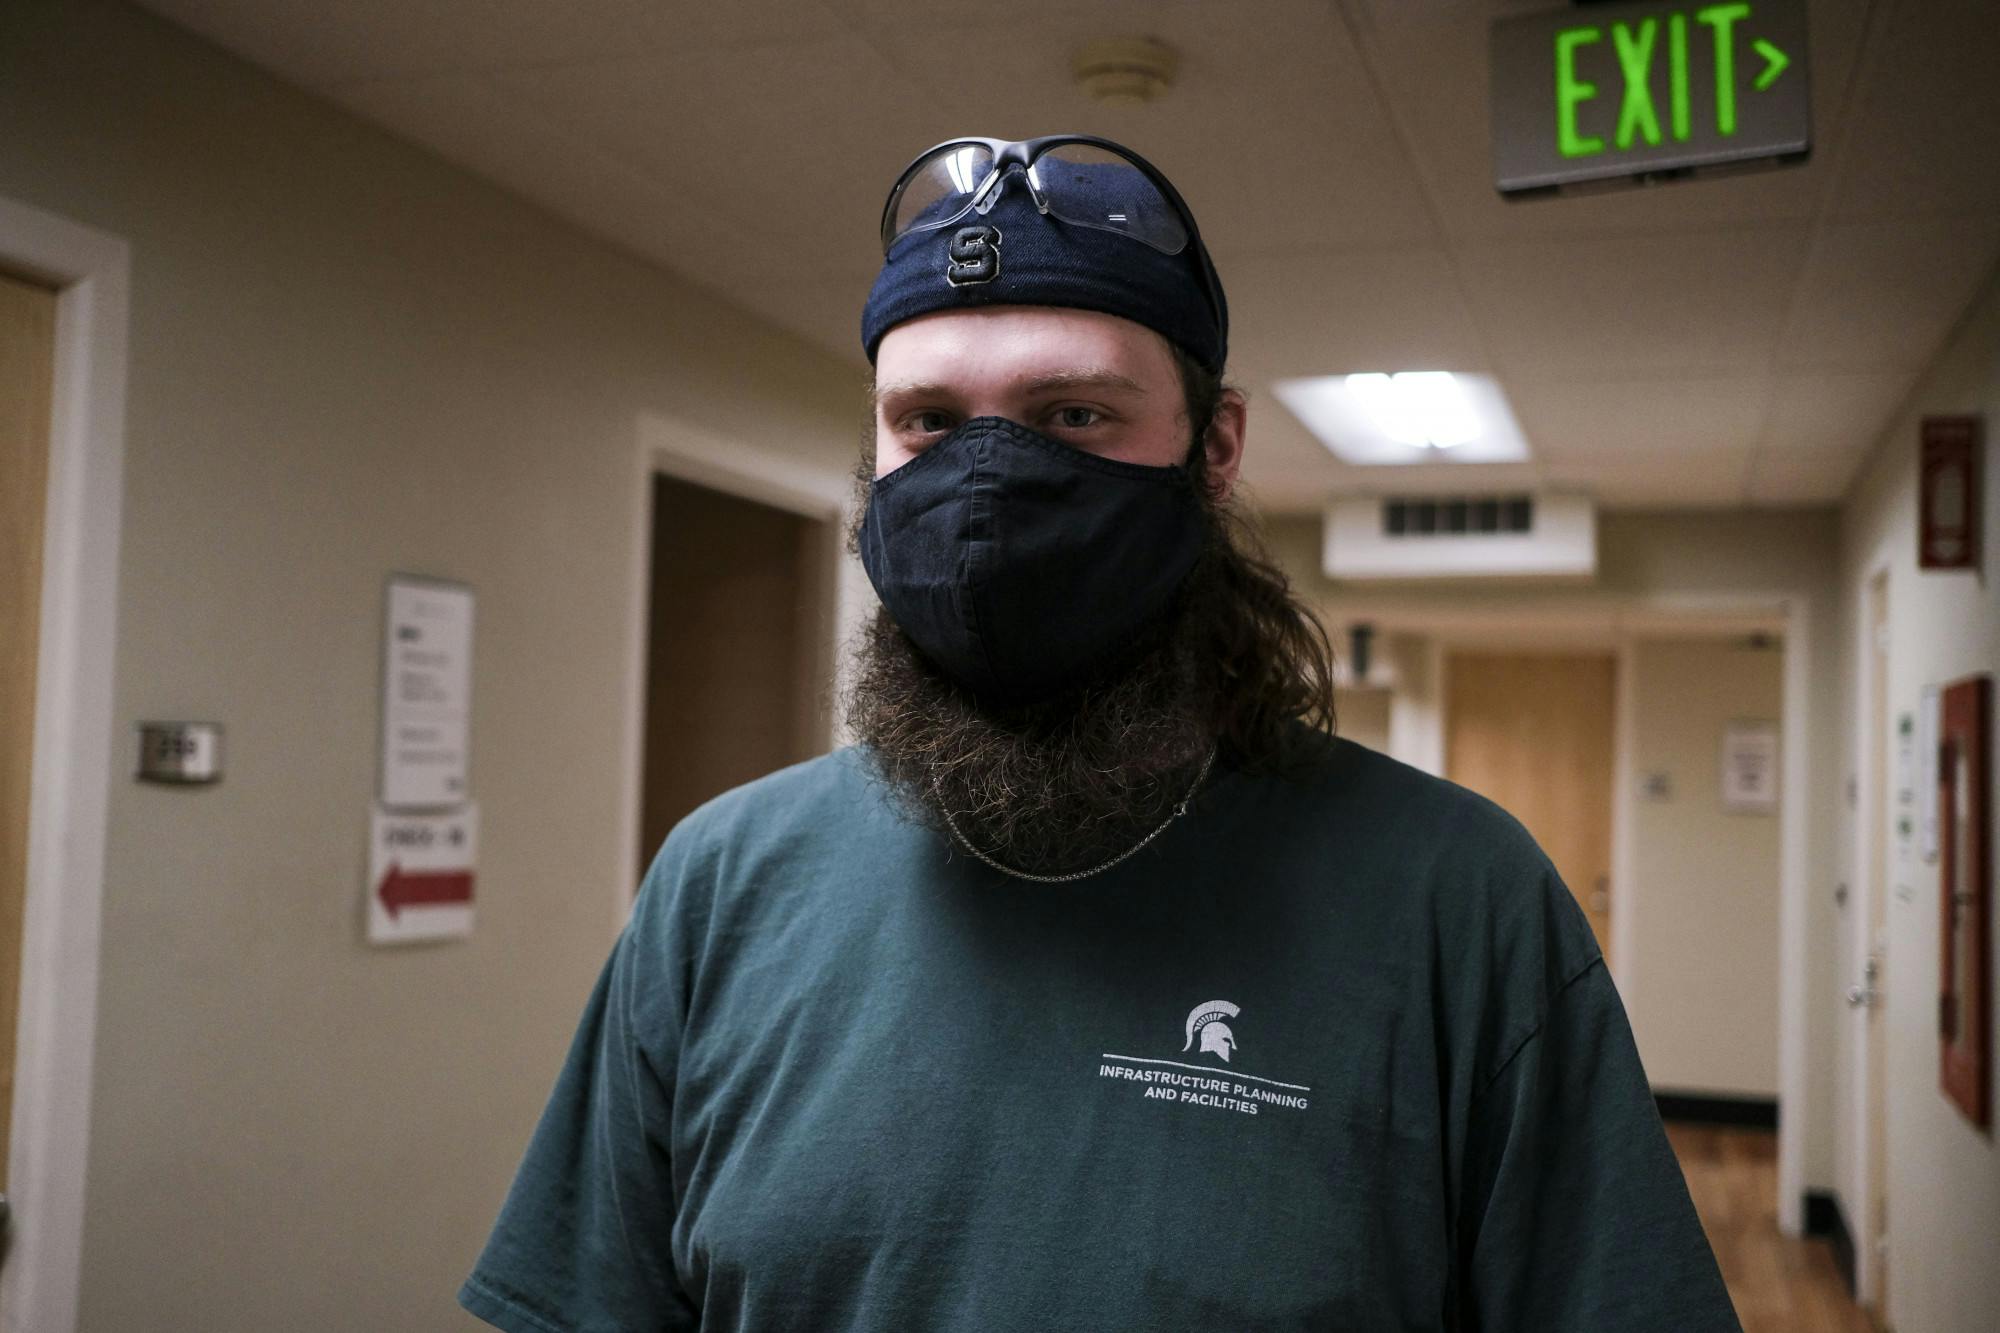 A bearded person wearing a face mask and a backwards cap with eye protection glasses resting on it stands in a hallway posing for a picture.